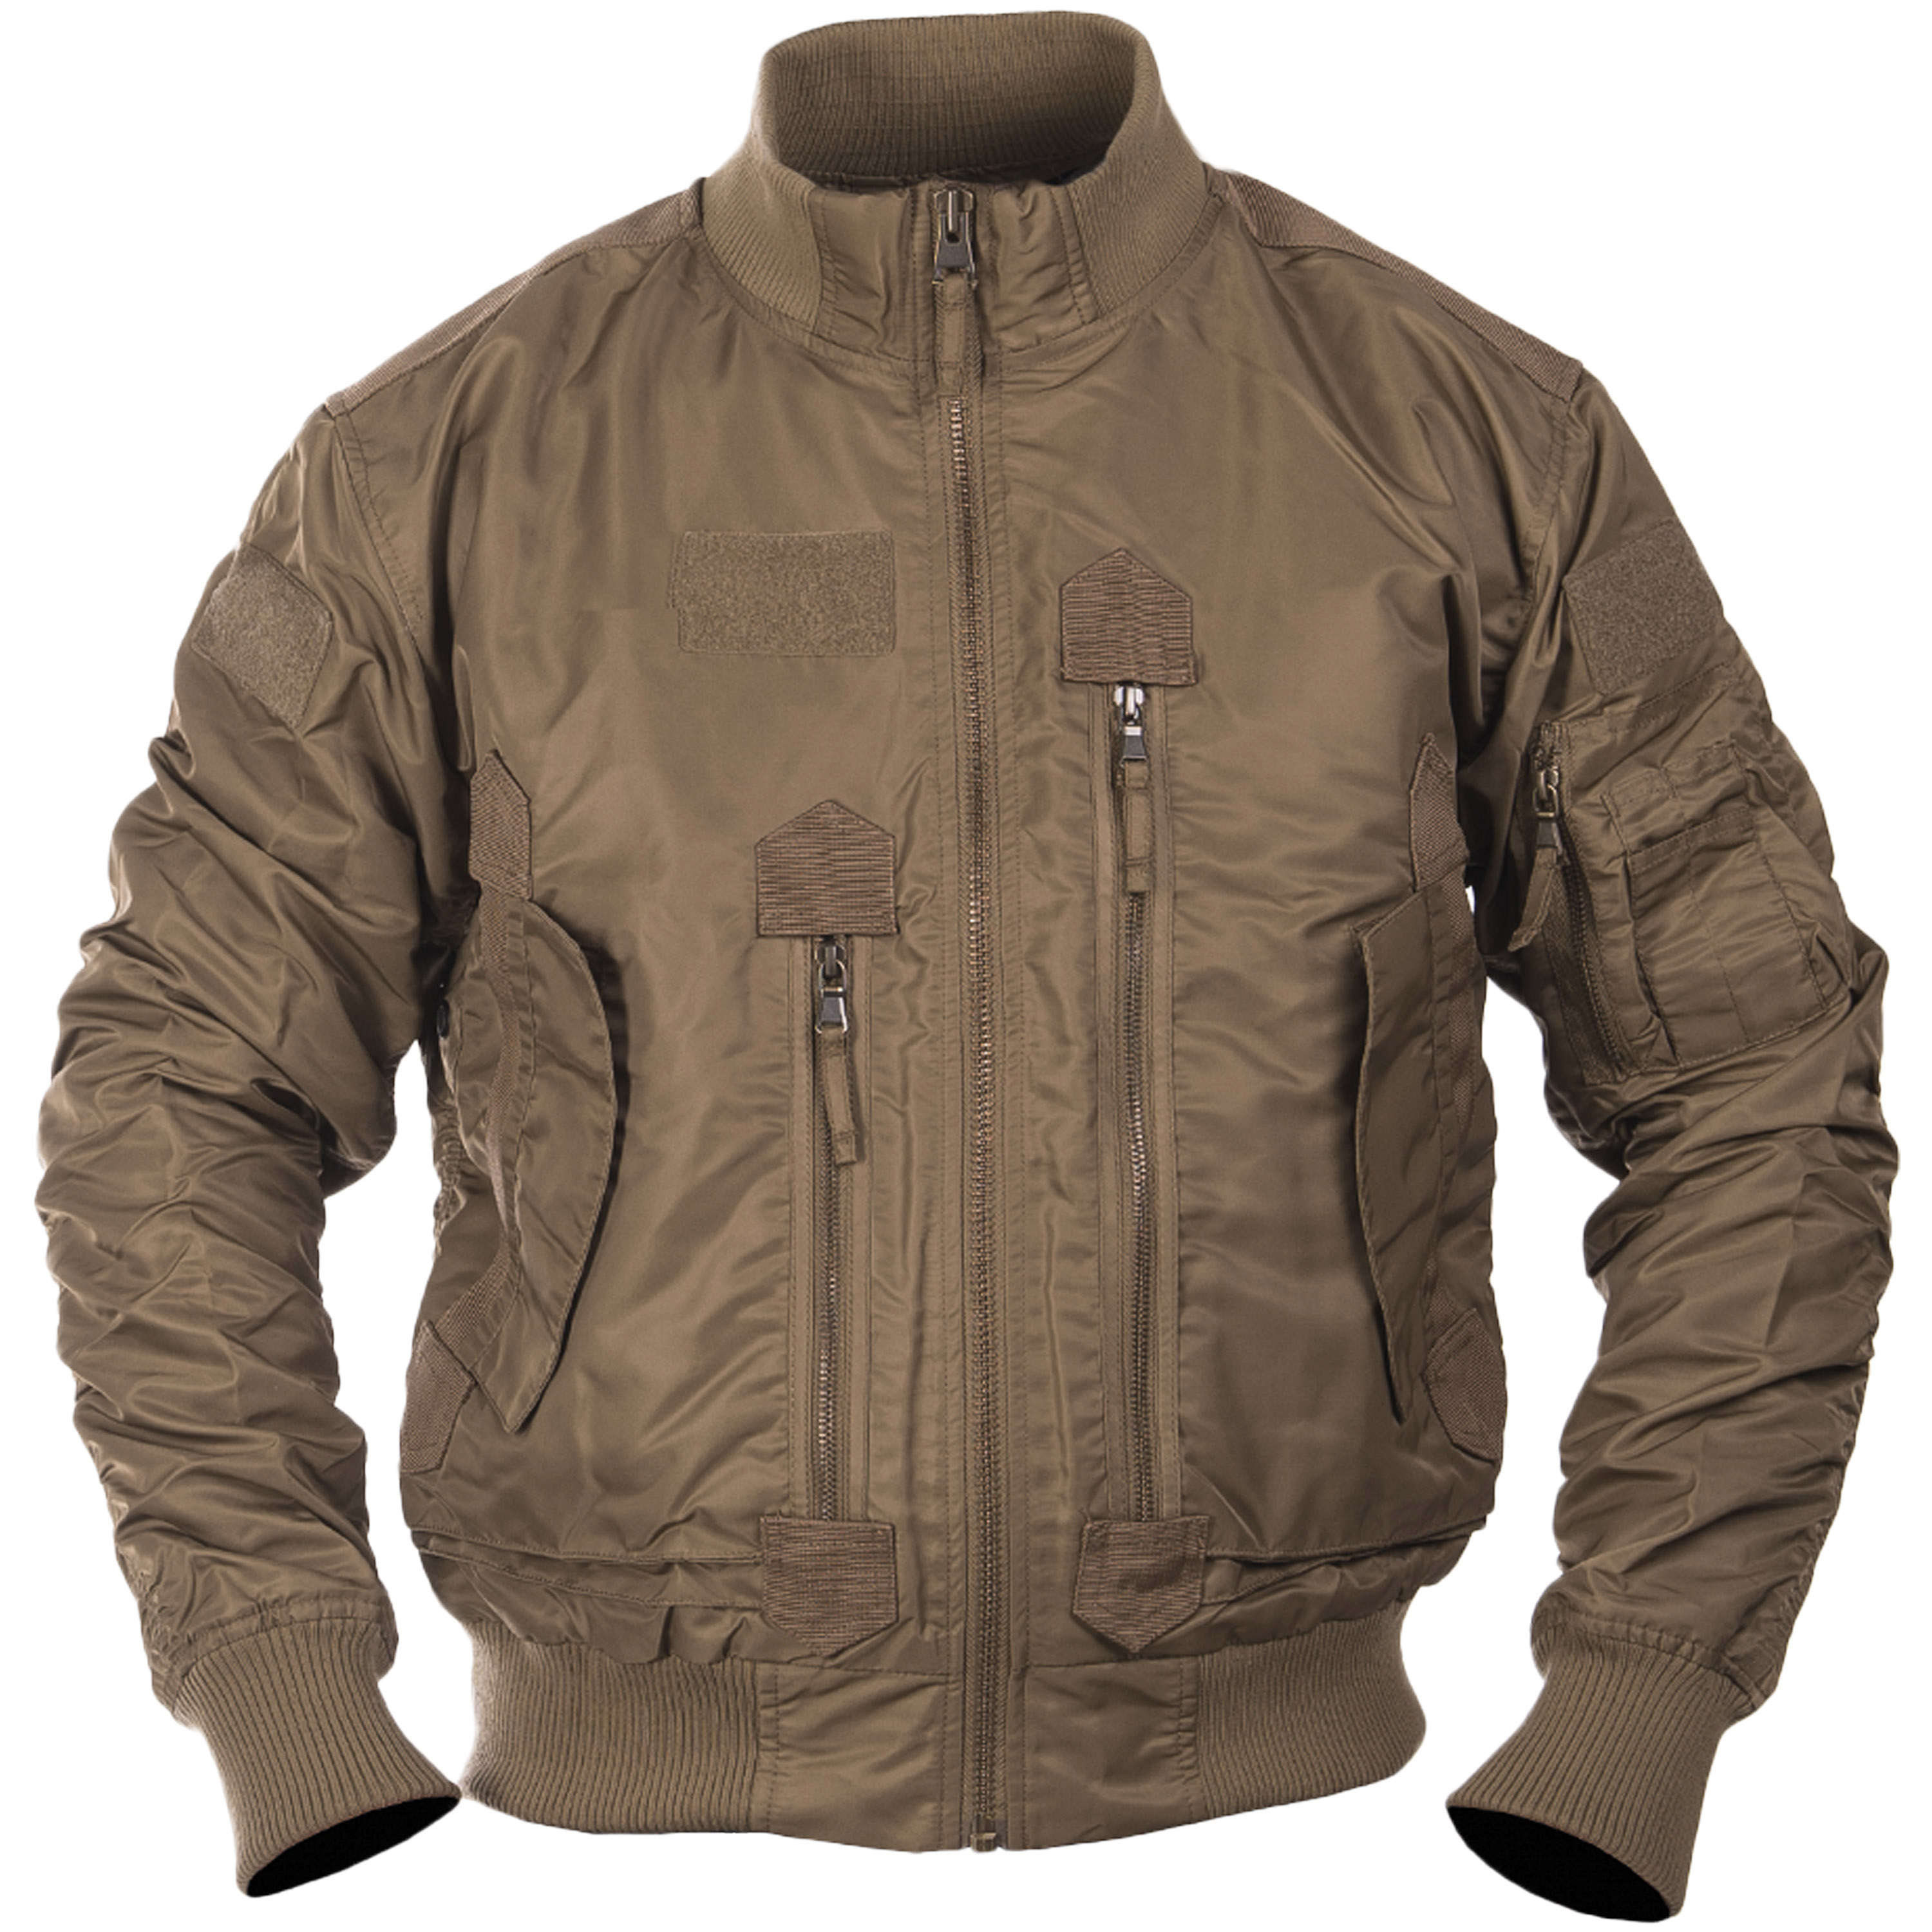 Purchase the US Tactical Flight Jacket dark coyote by ASMC